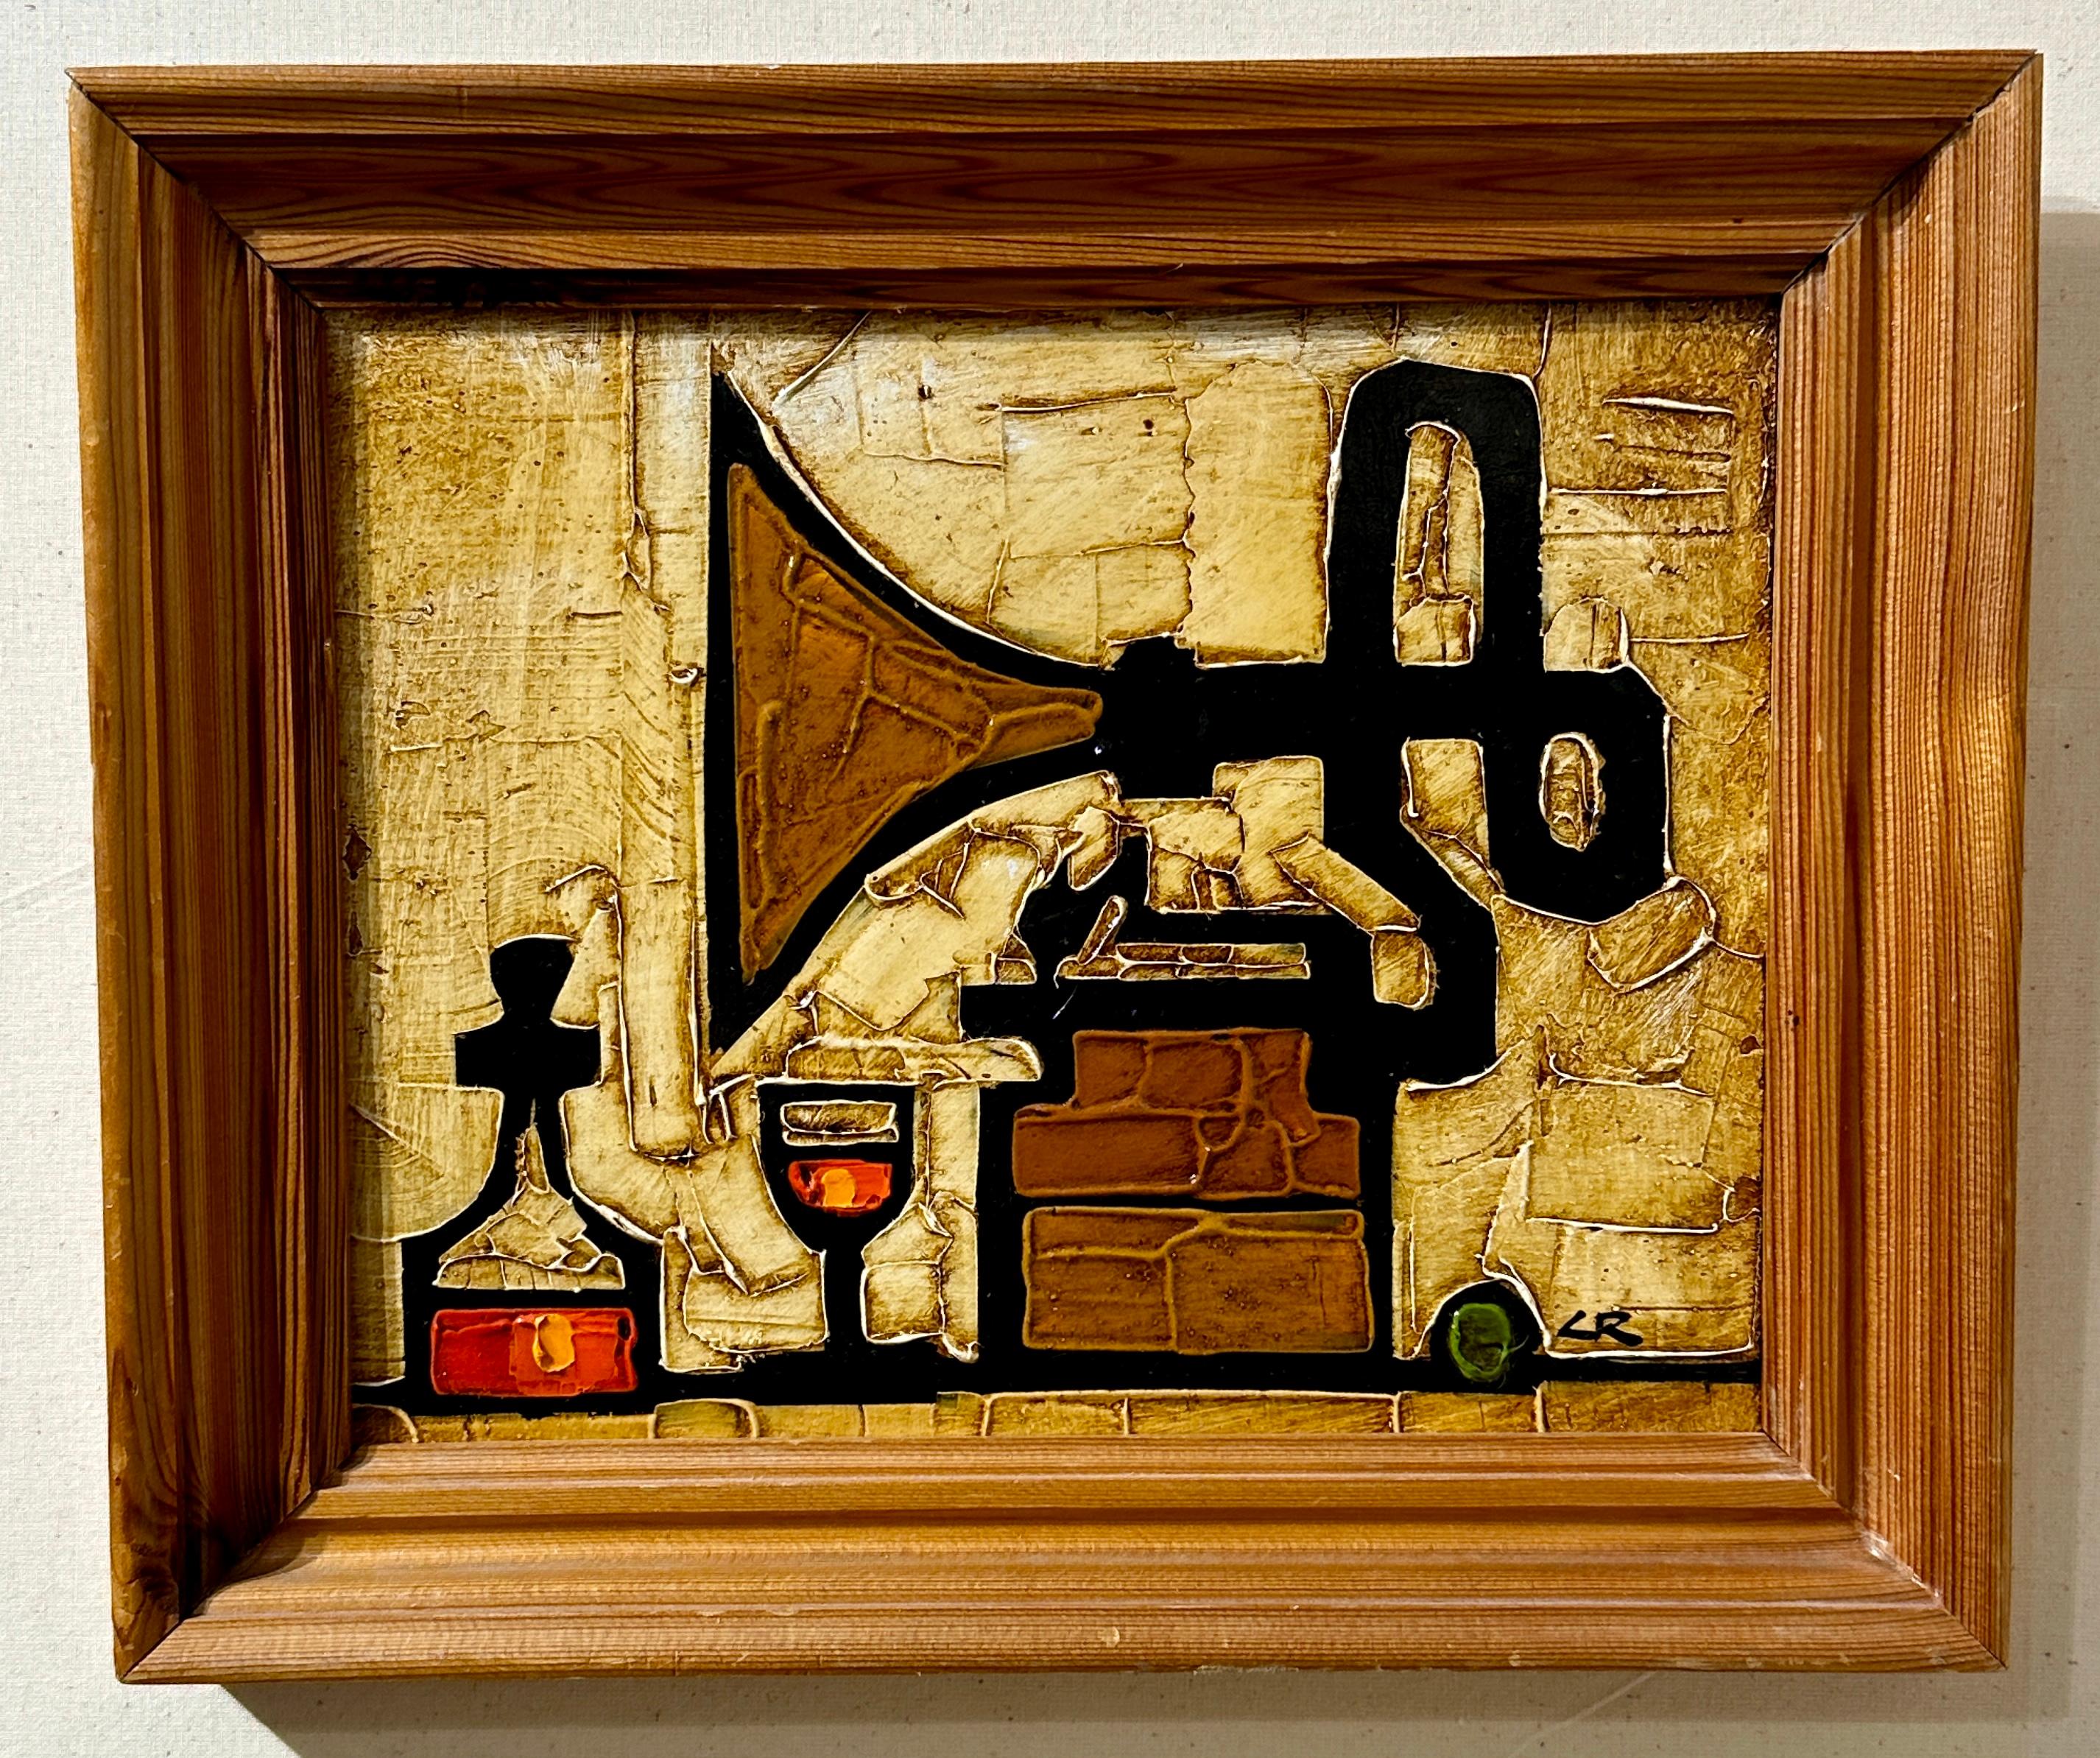 Modern British, Interior with an old record player, port decanter and glass - Painting by Colin Ruffell